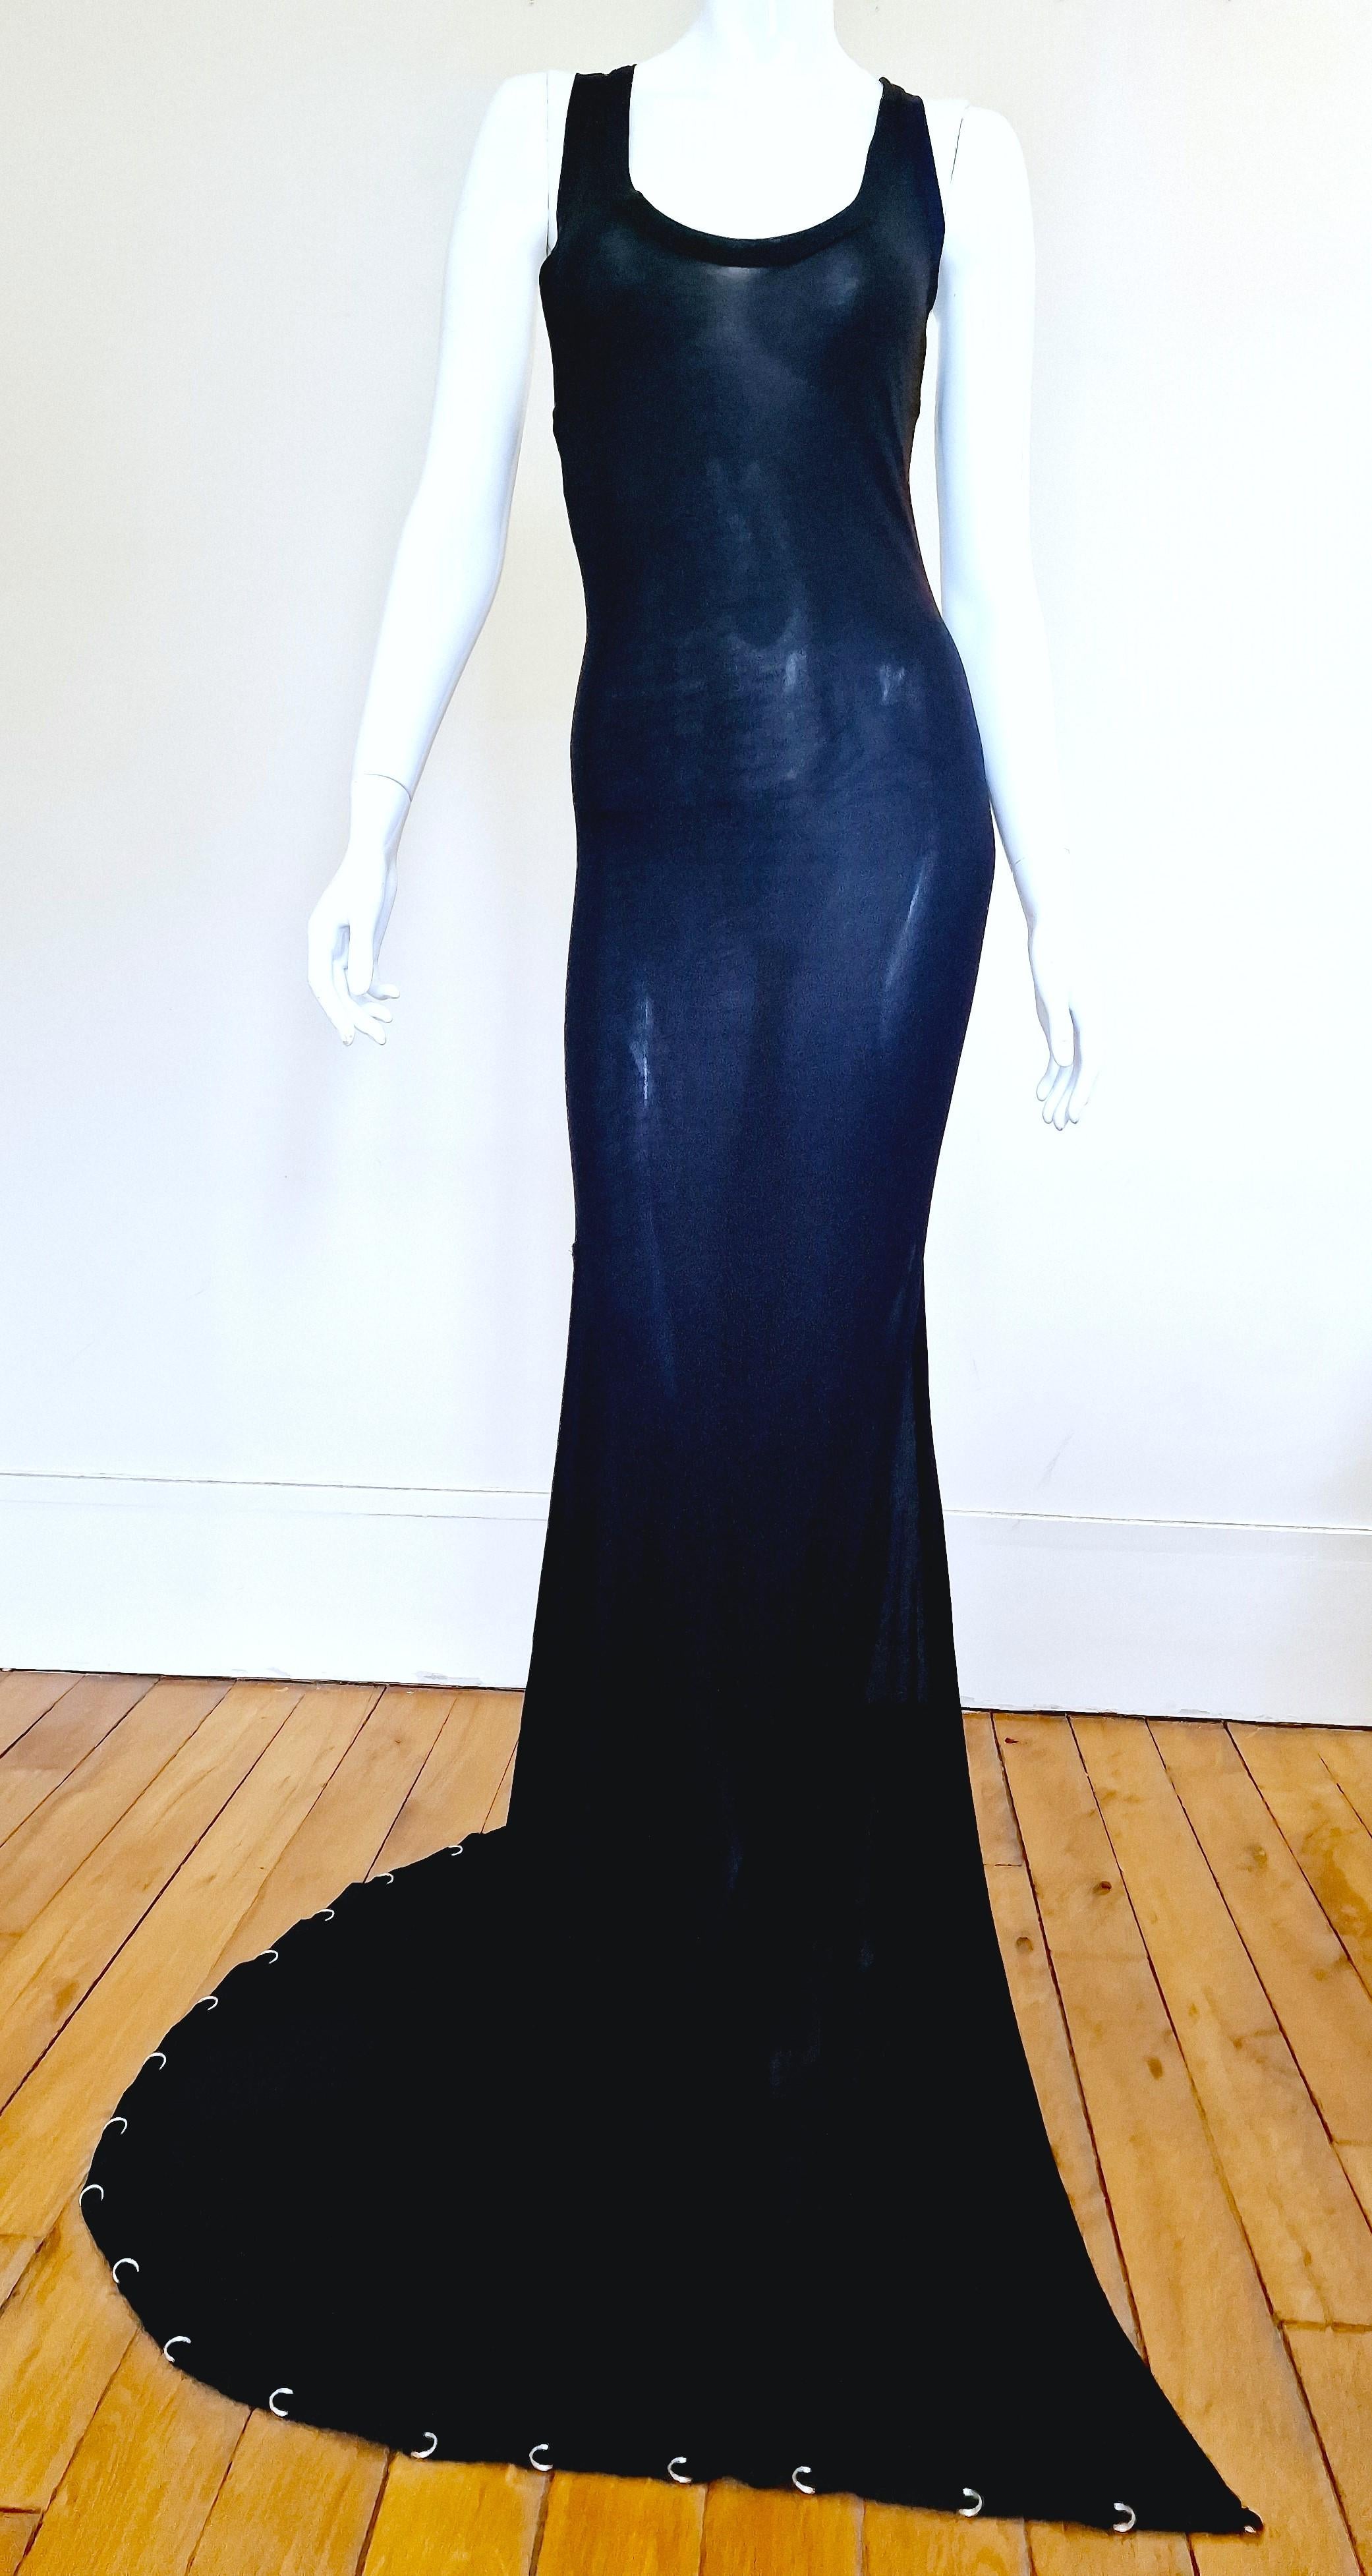 Gown by Jean Paul Gaultier!
You can adjust it with the metal ring at your waist or just hold it in your hand.
With 21 metal rings.

EXCELLENT condition!

SIZE
Fits from bigger medium to large.
Marked size: IT44 / D40 / FR40 / GB12 / USA10.
Very